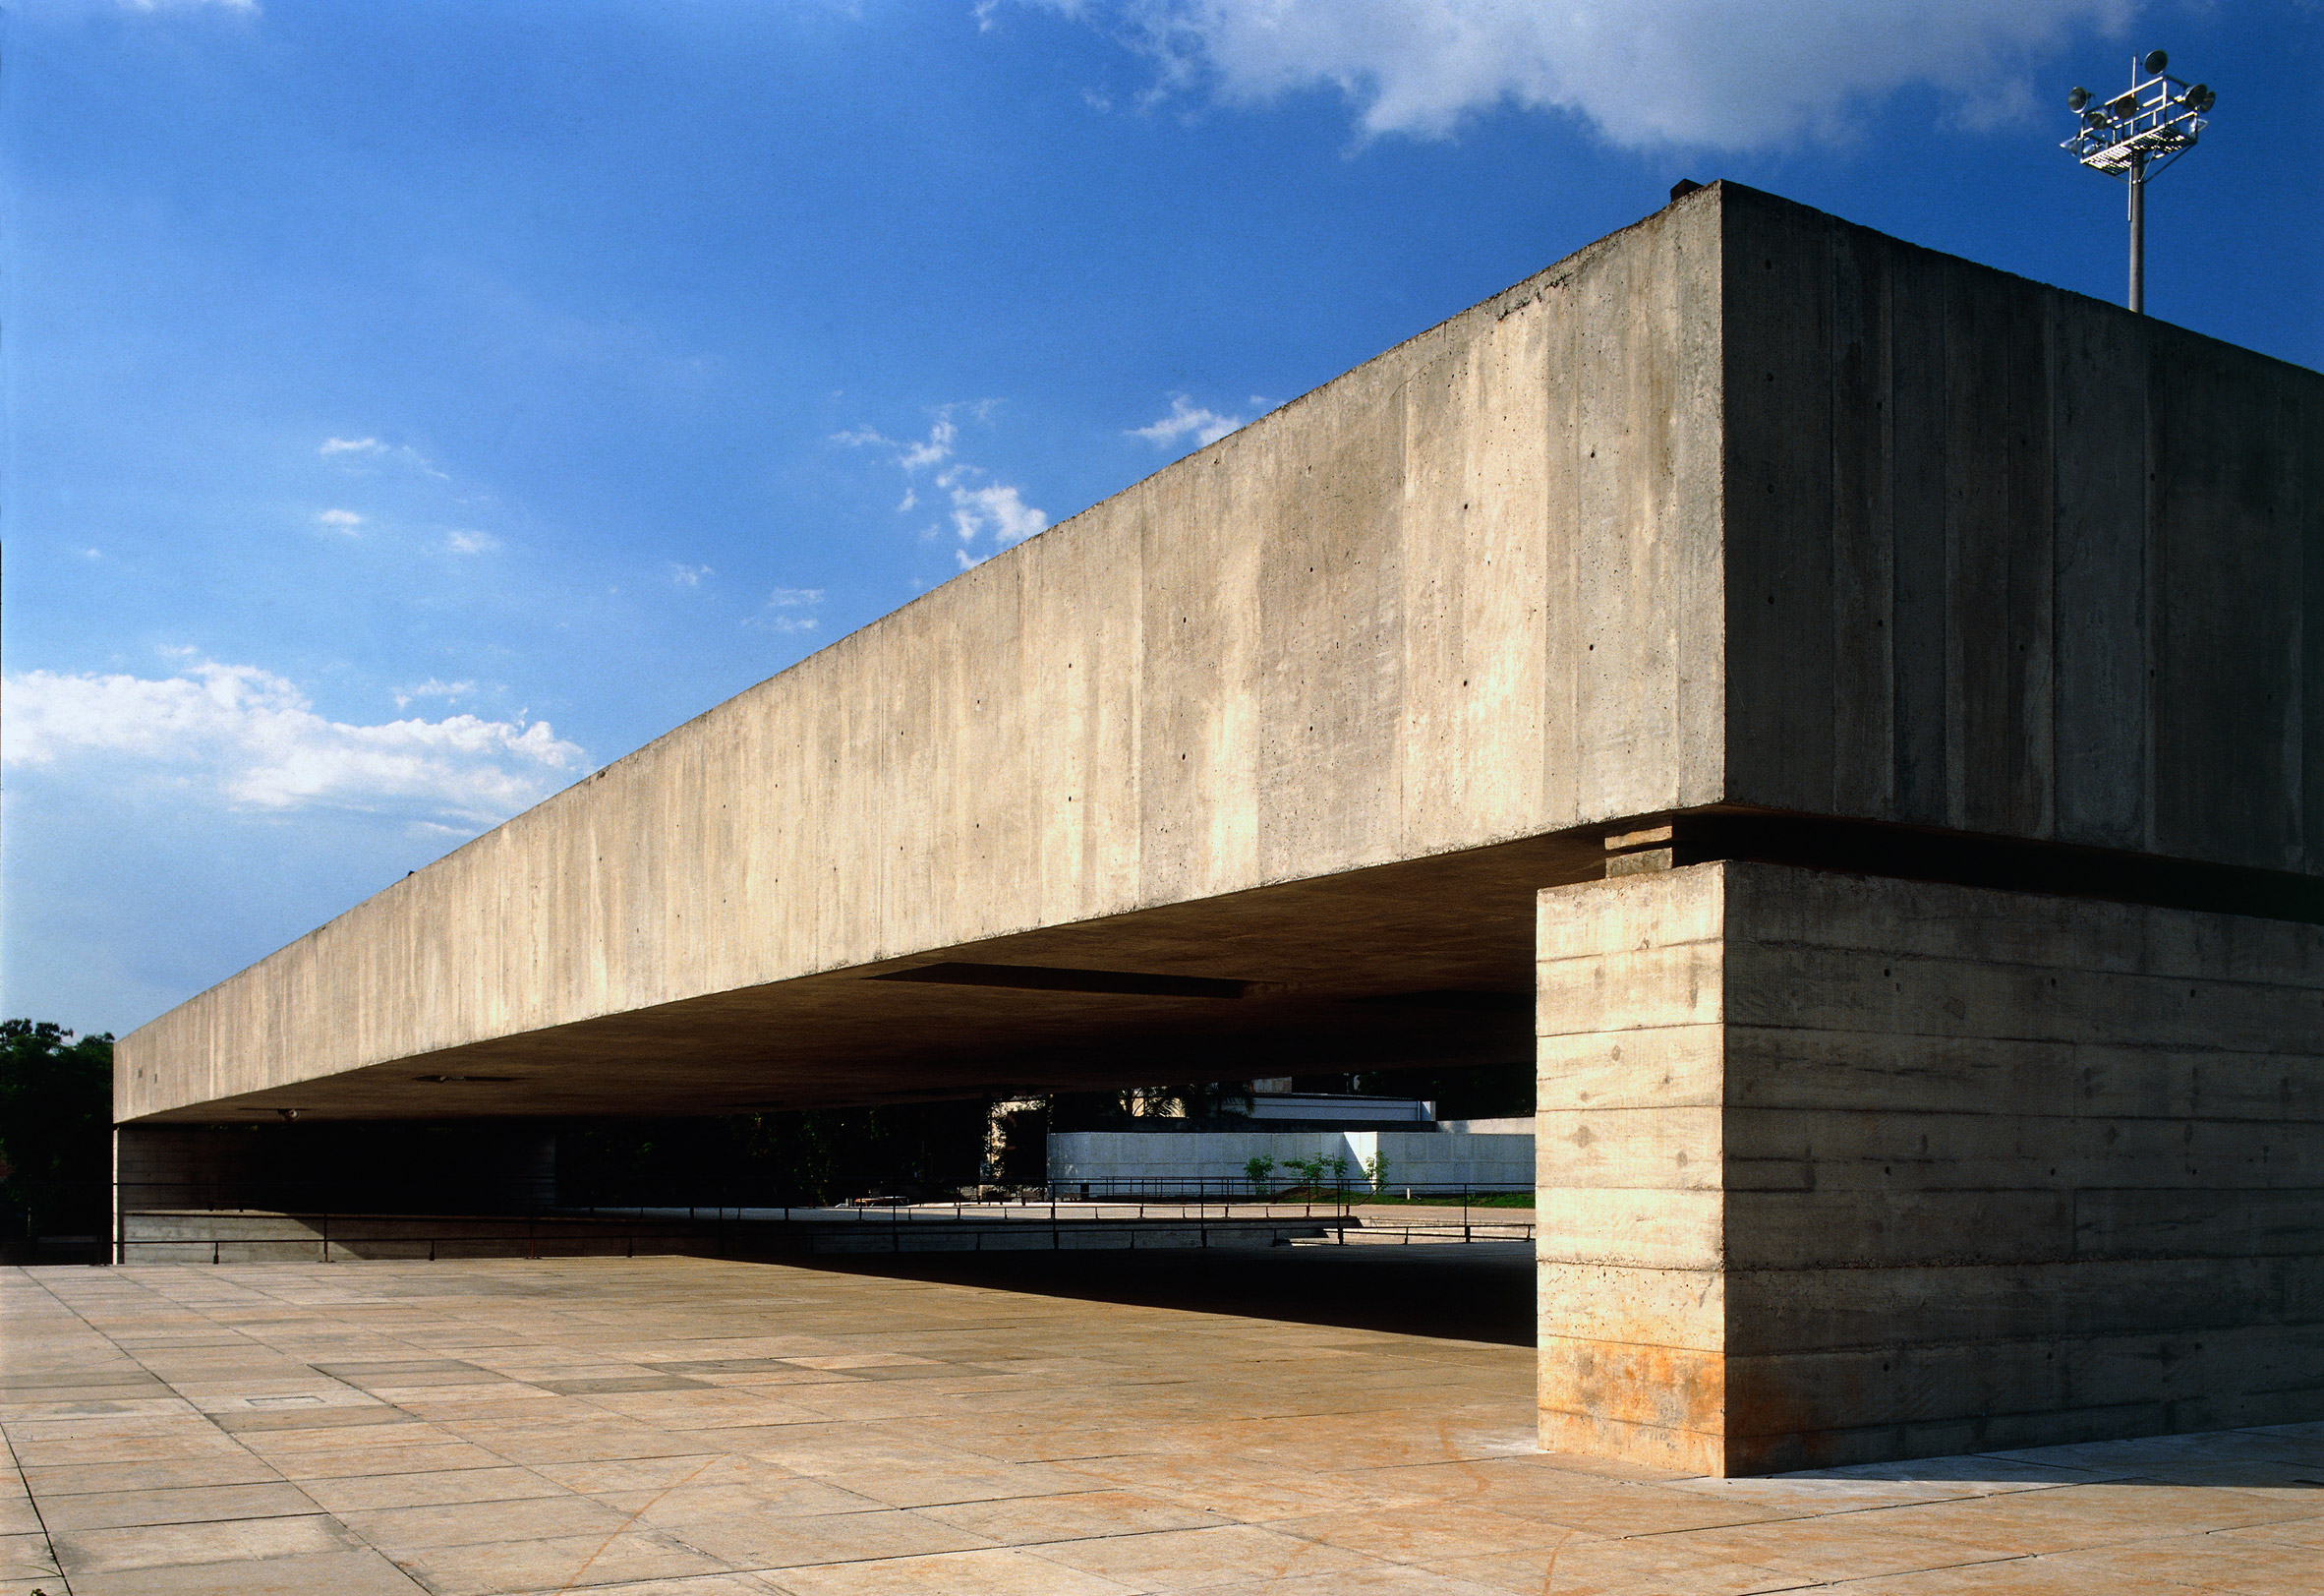 The Brazilian Sculpture Museum by Paulo Mendes da Rocha is formed of concrete slabs